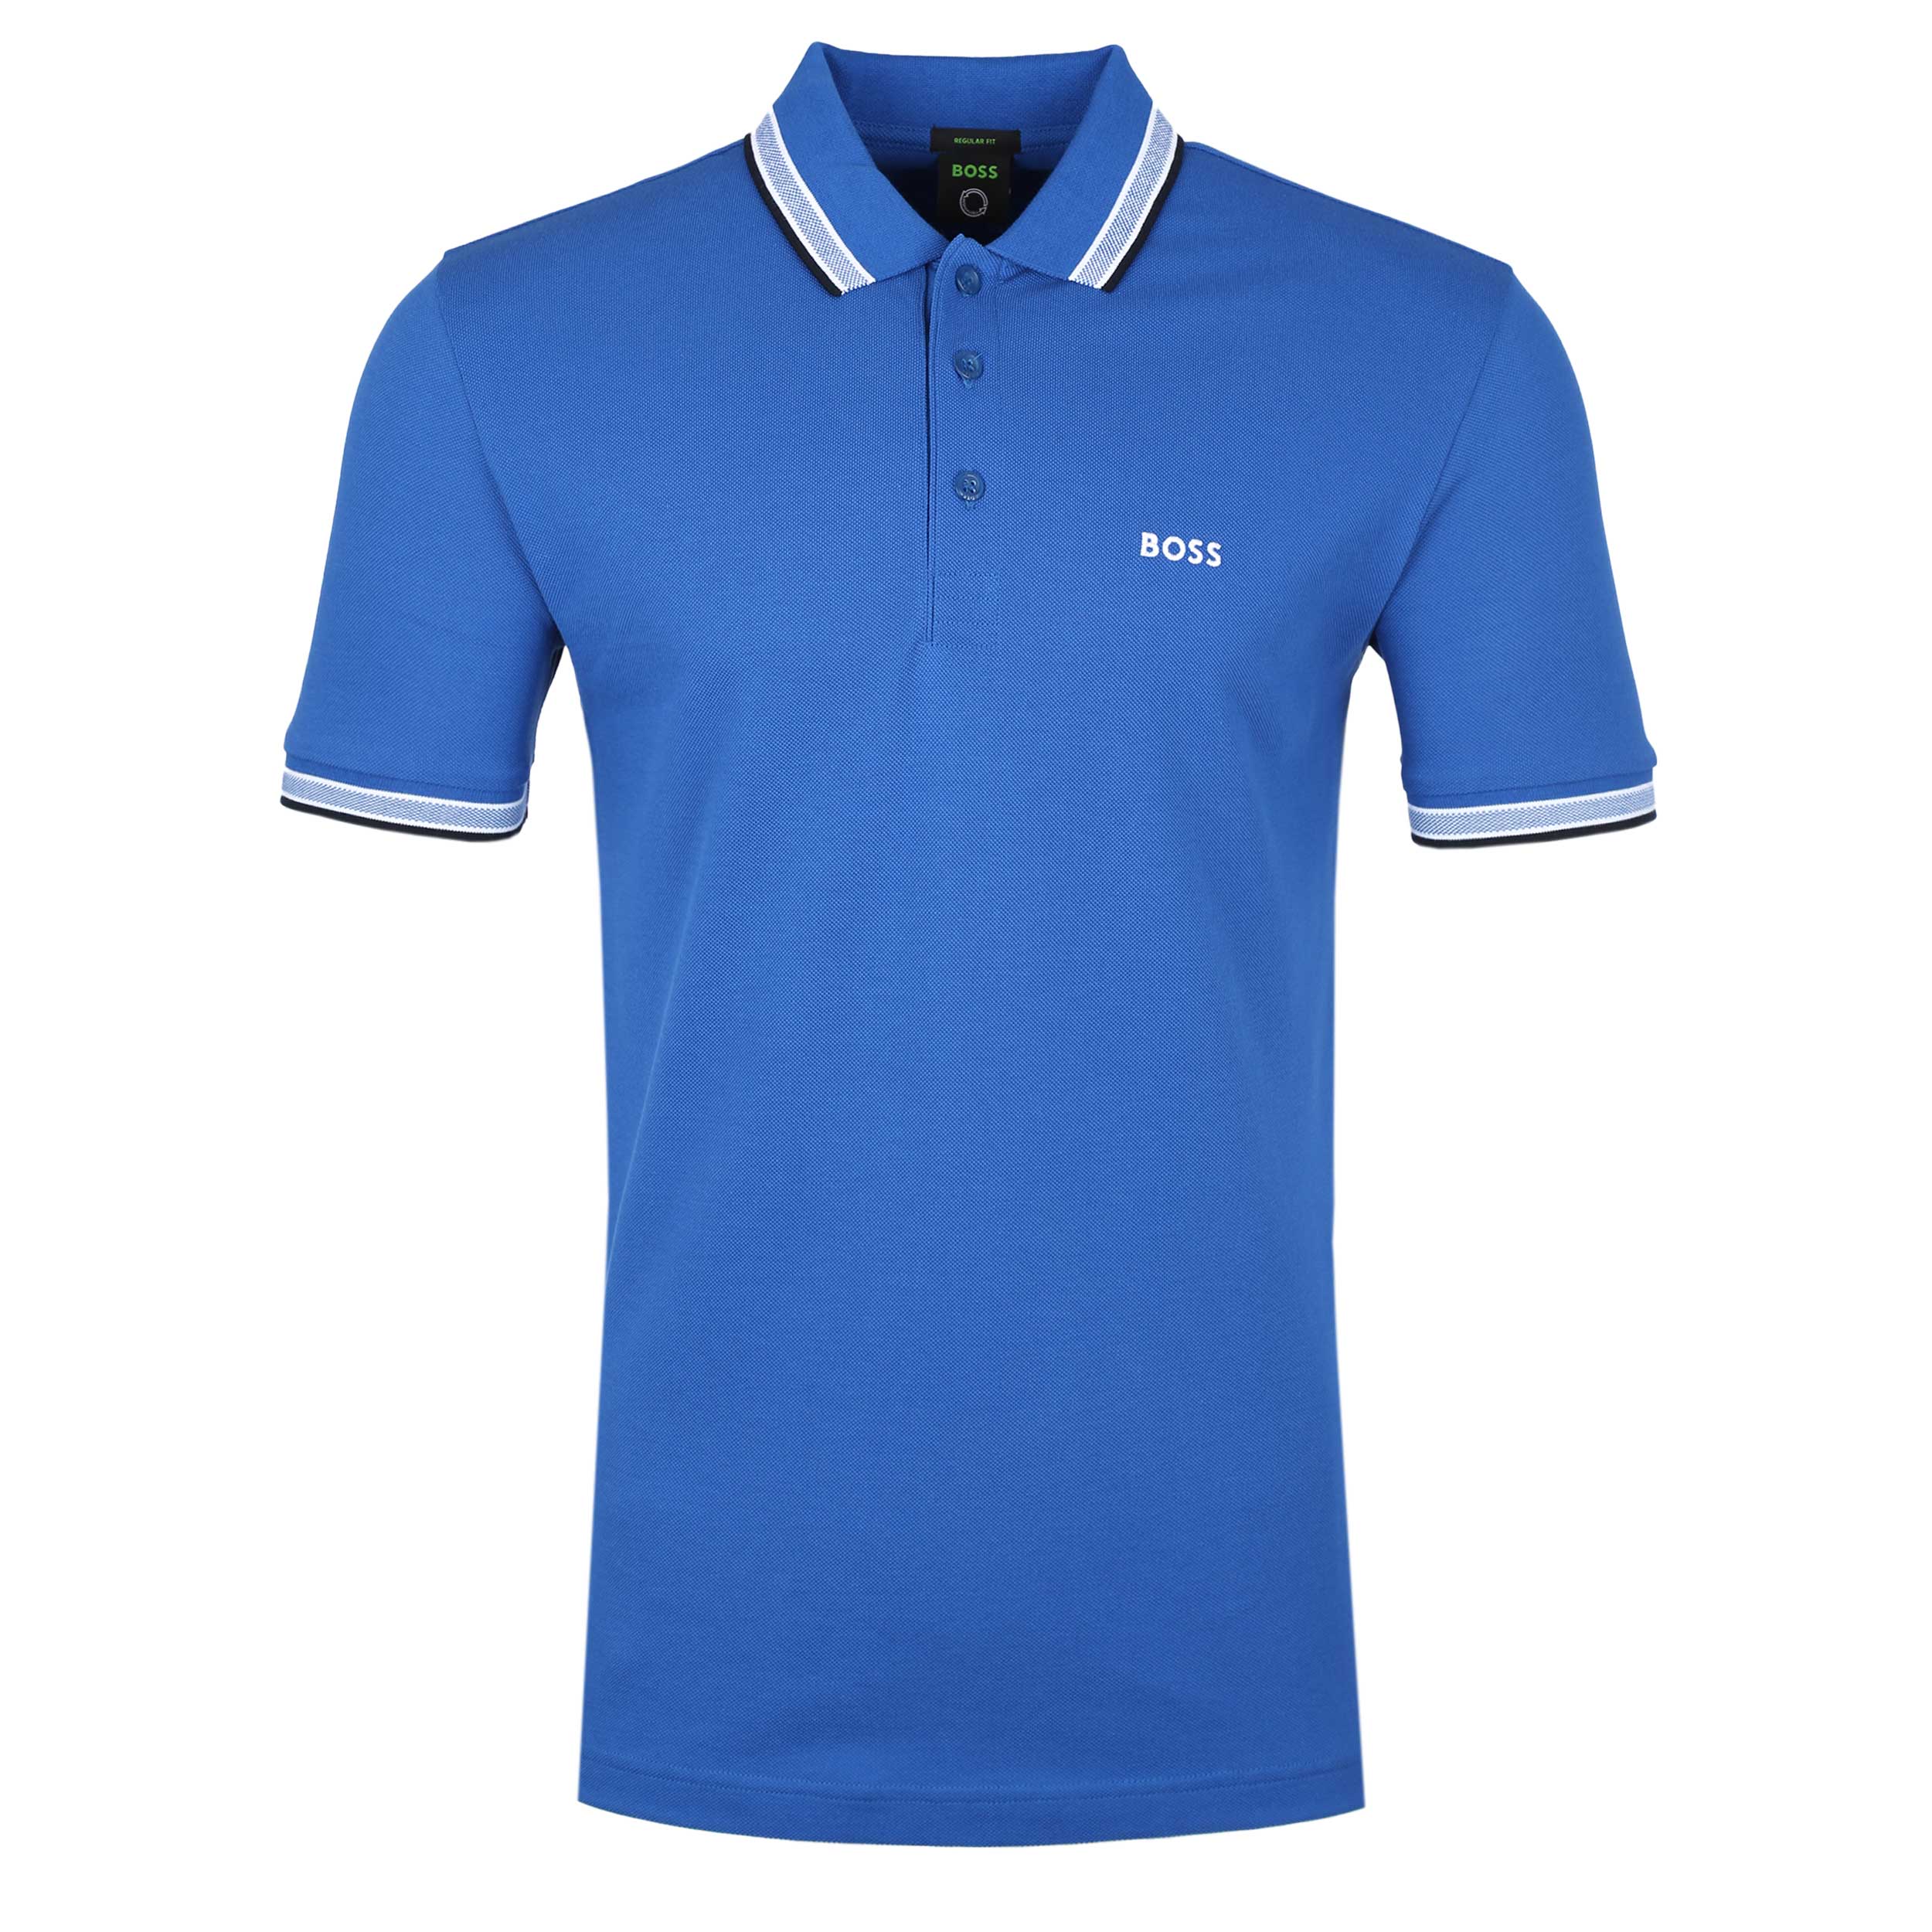 BOSS Paddy Polo Shirt in Bright Blue